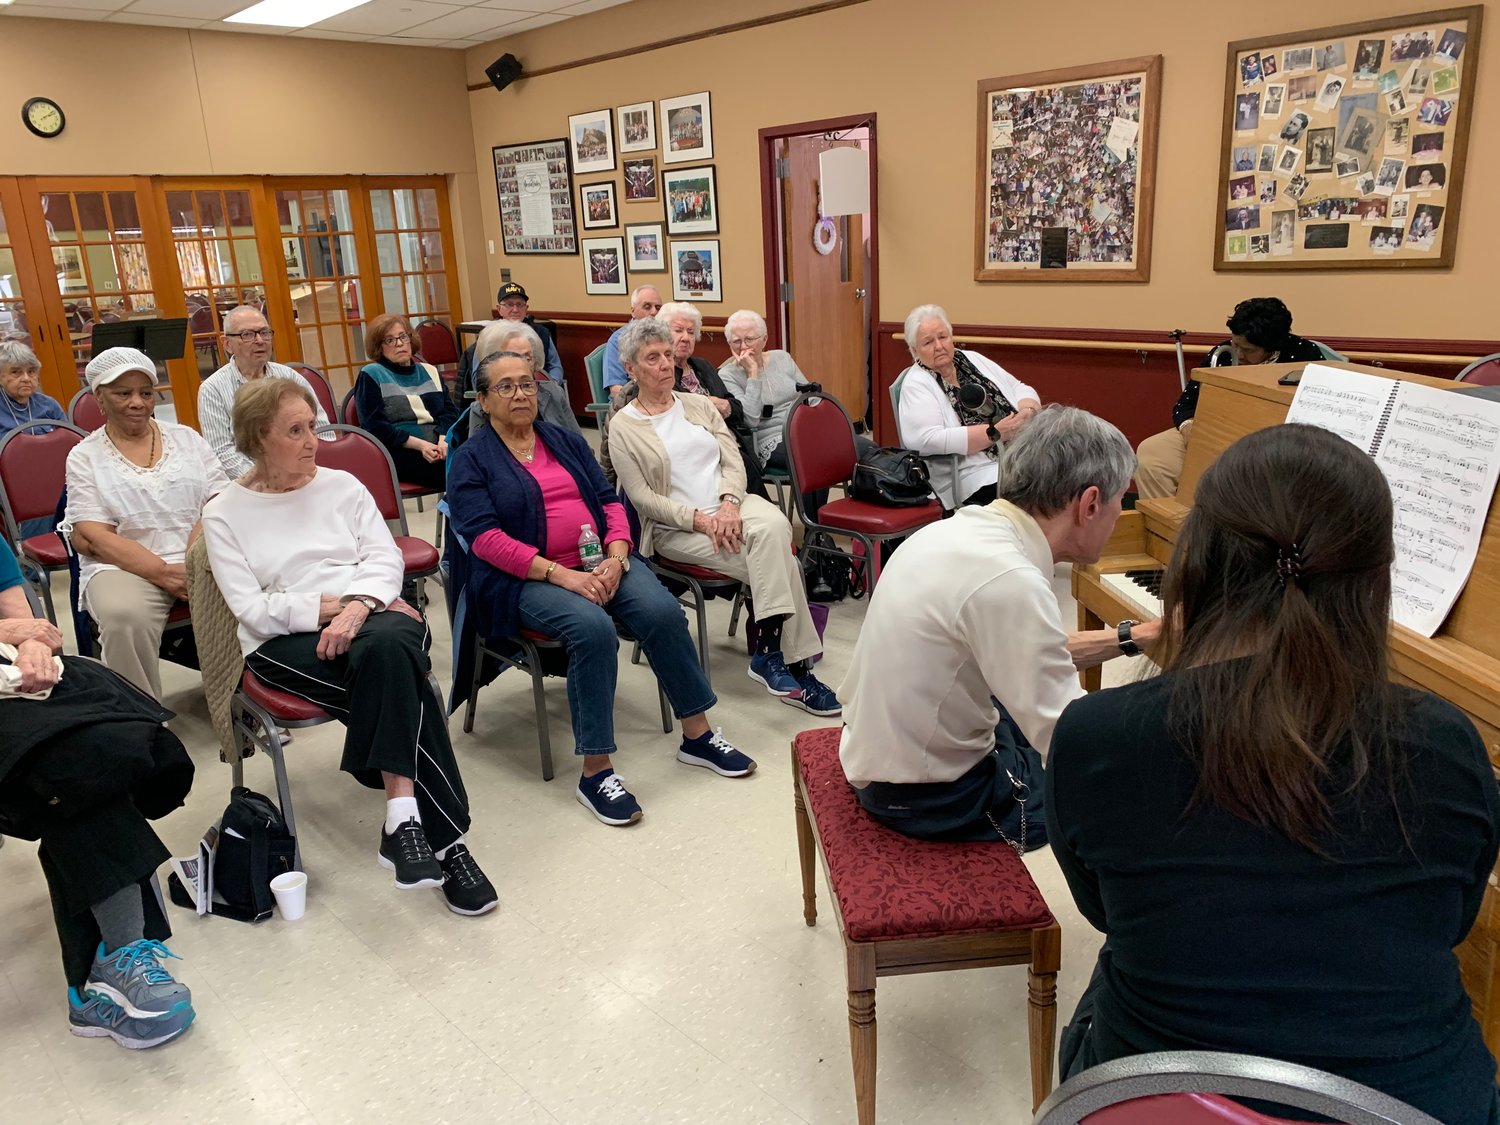 Although the audience for Holzman’s performance at the senior center wasn’t large, several people had strong emotional responses to the music.